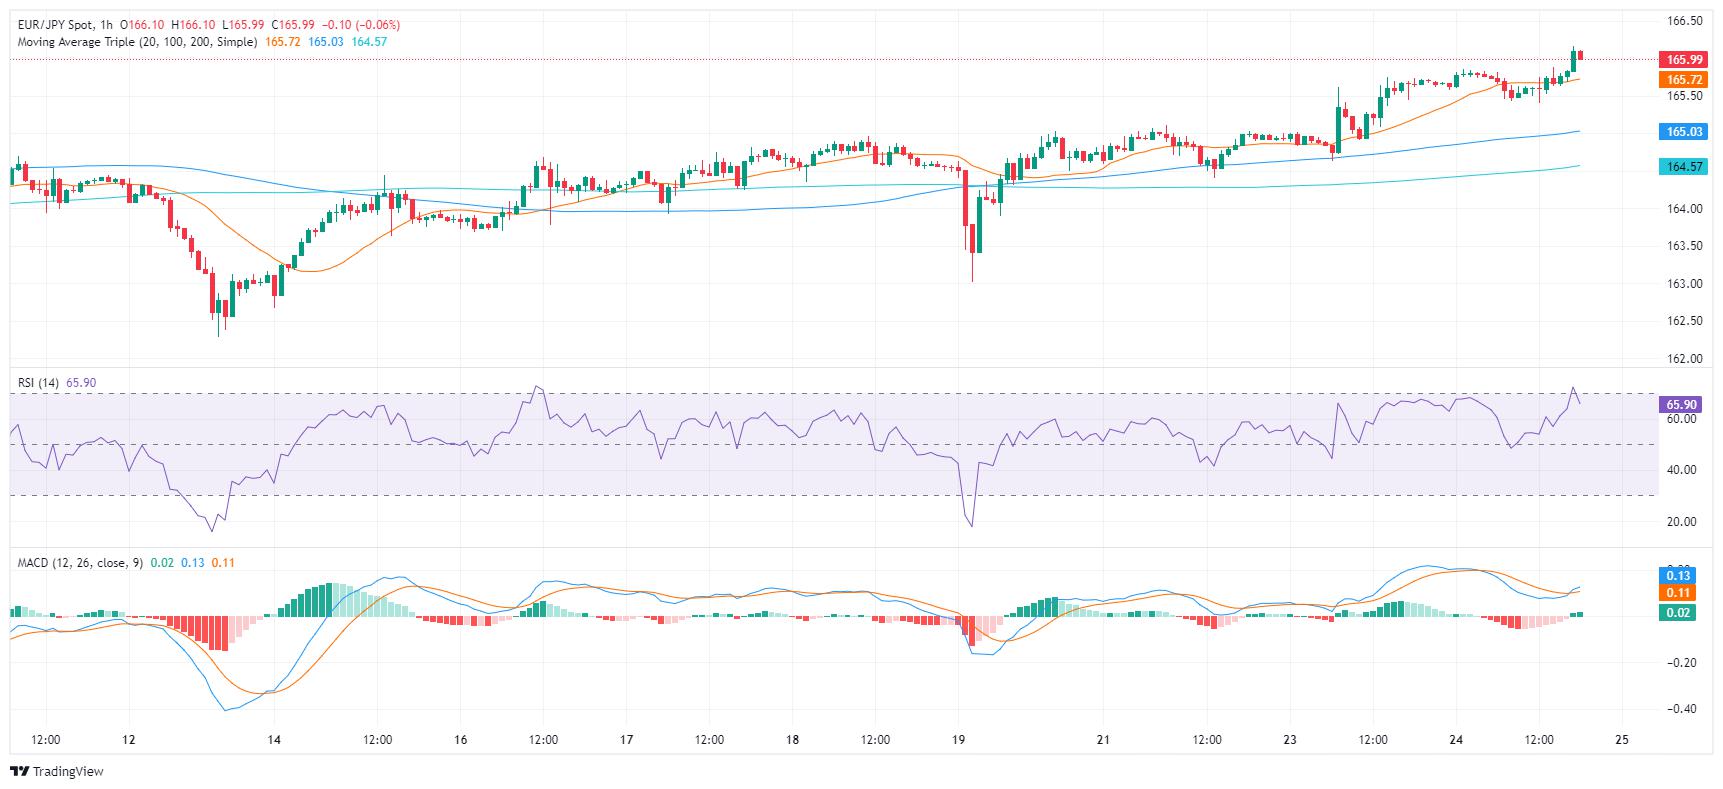 EUR/JPY Price Analysis: Bulls continue dominating, yet a consolidation may be incoming